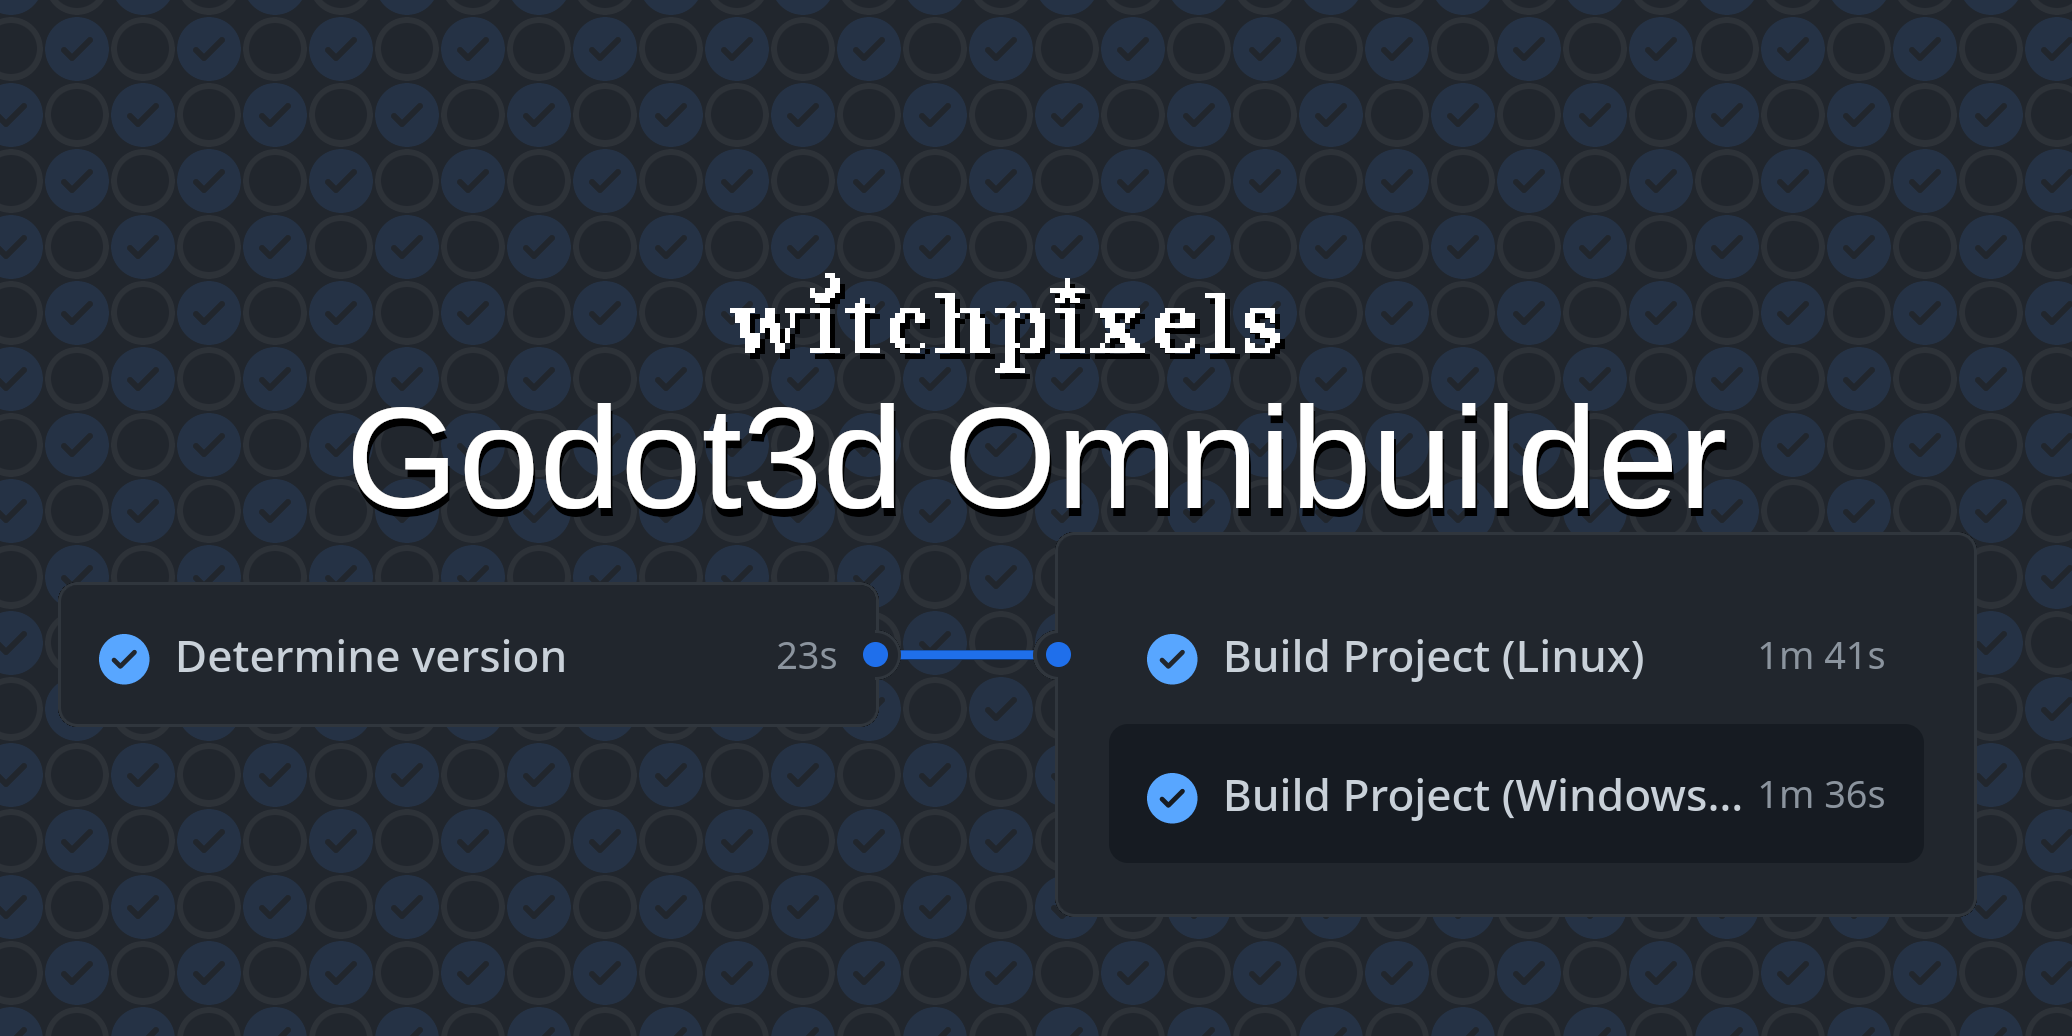 Title Image for the 3d omnibuilder container.